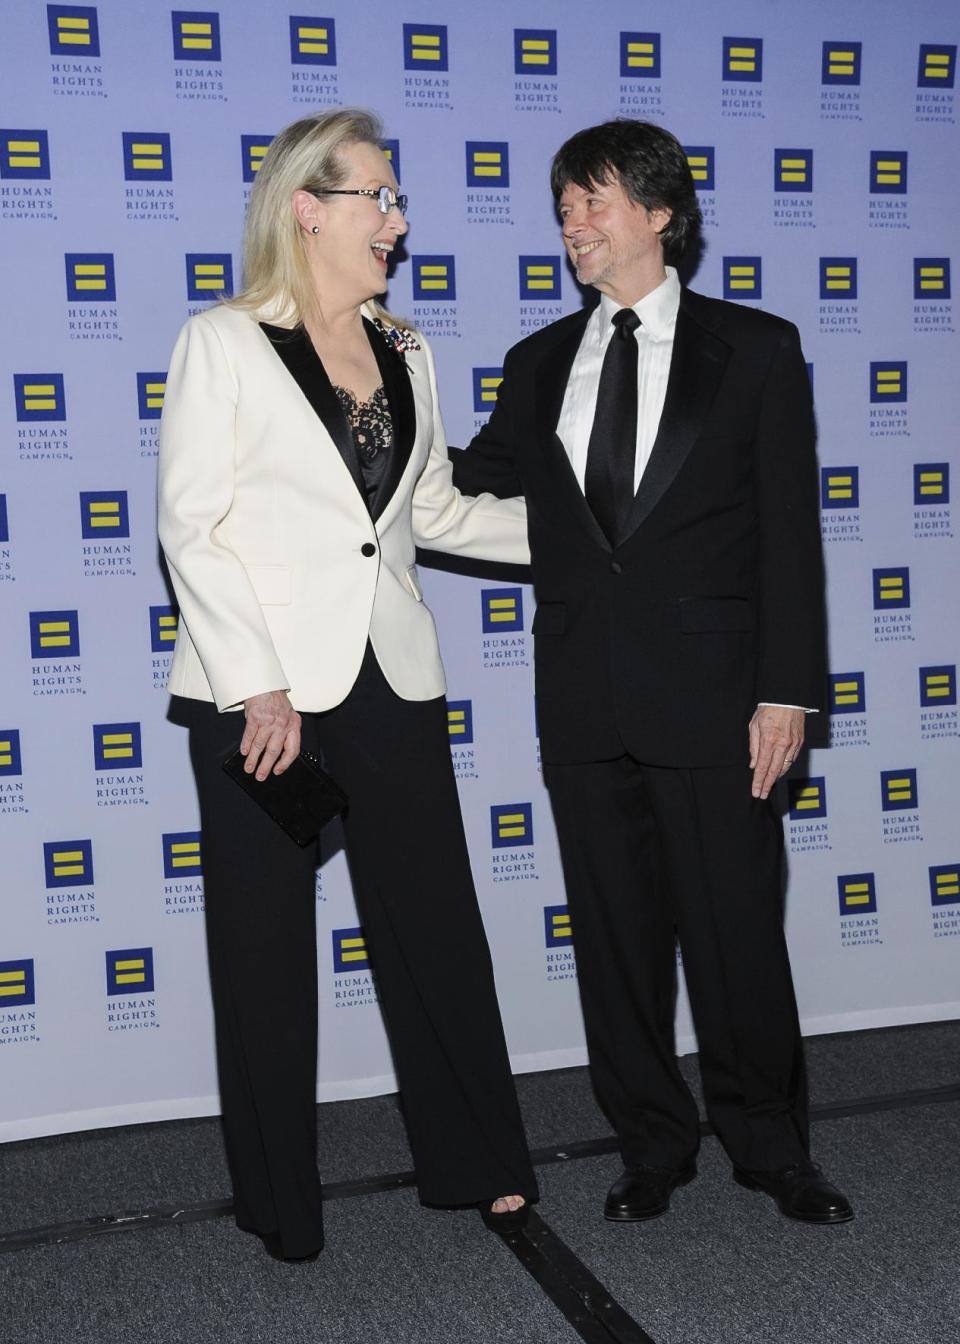 Meryl Streep, left, and Ken Burns attend the Human Rights Campaign Greater New York Gala at Waldorf Astoria Hotel on Saturday, Feb. 11, 2017, in New York. (Photo by Christopher Smith/Invision/AP)